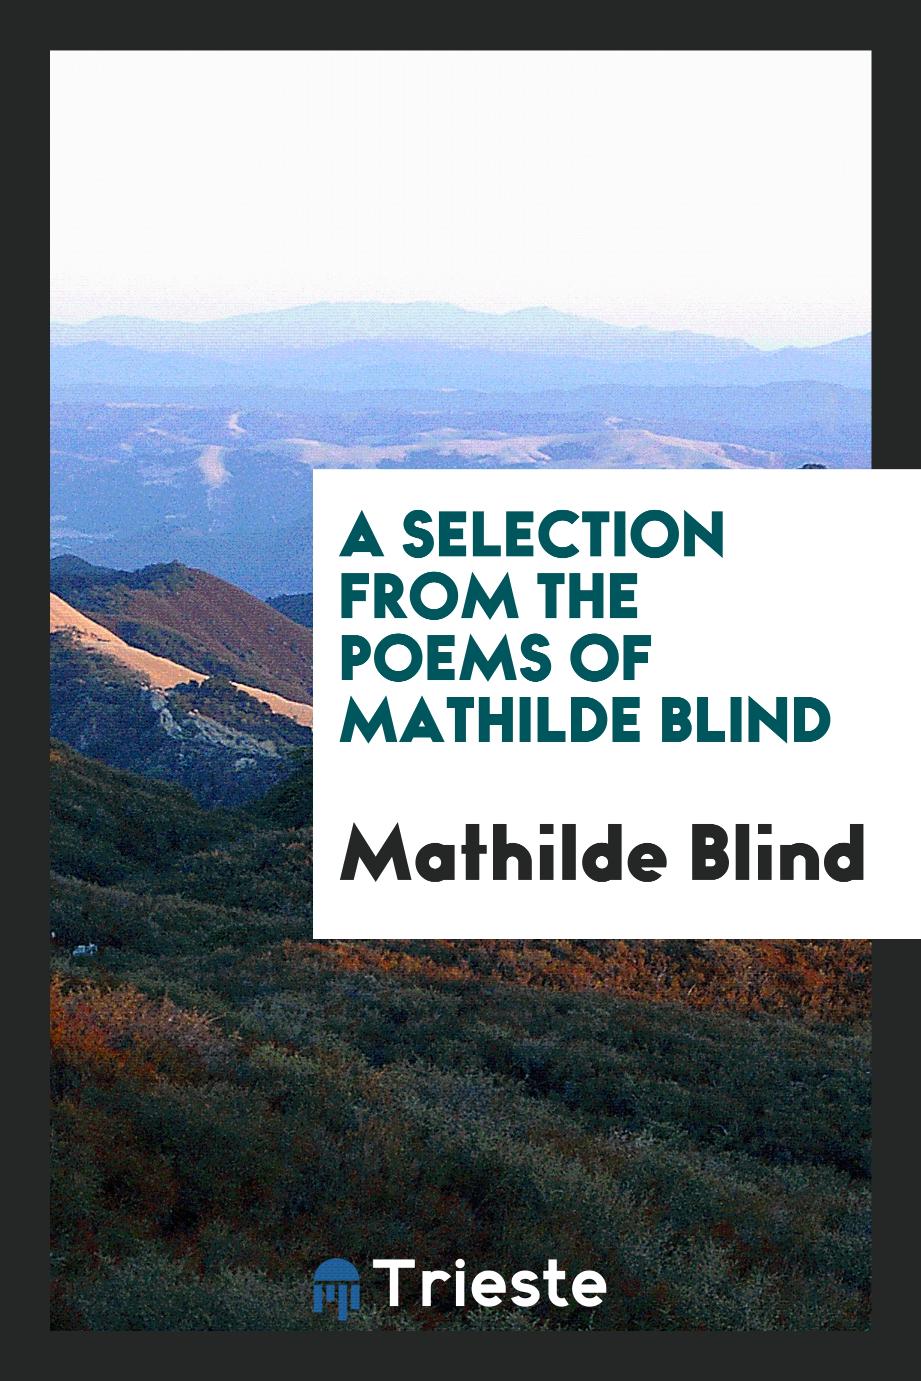 A selection from the poems of Mathilde Blind